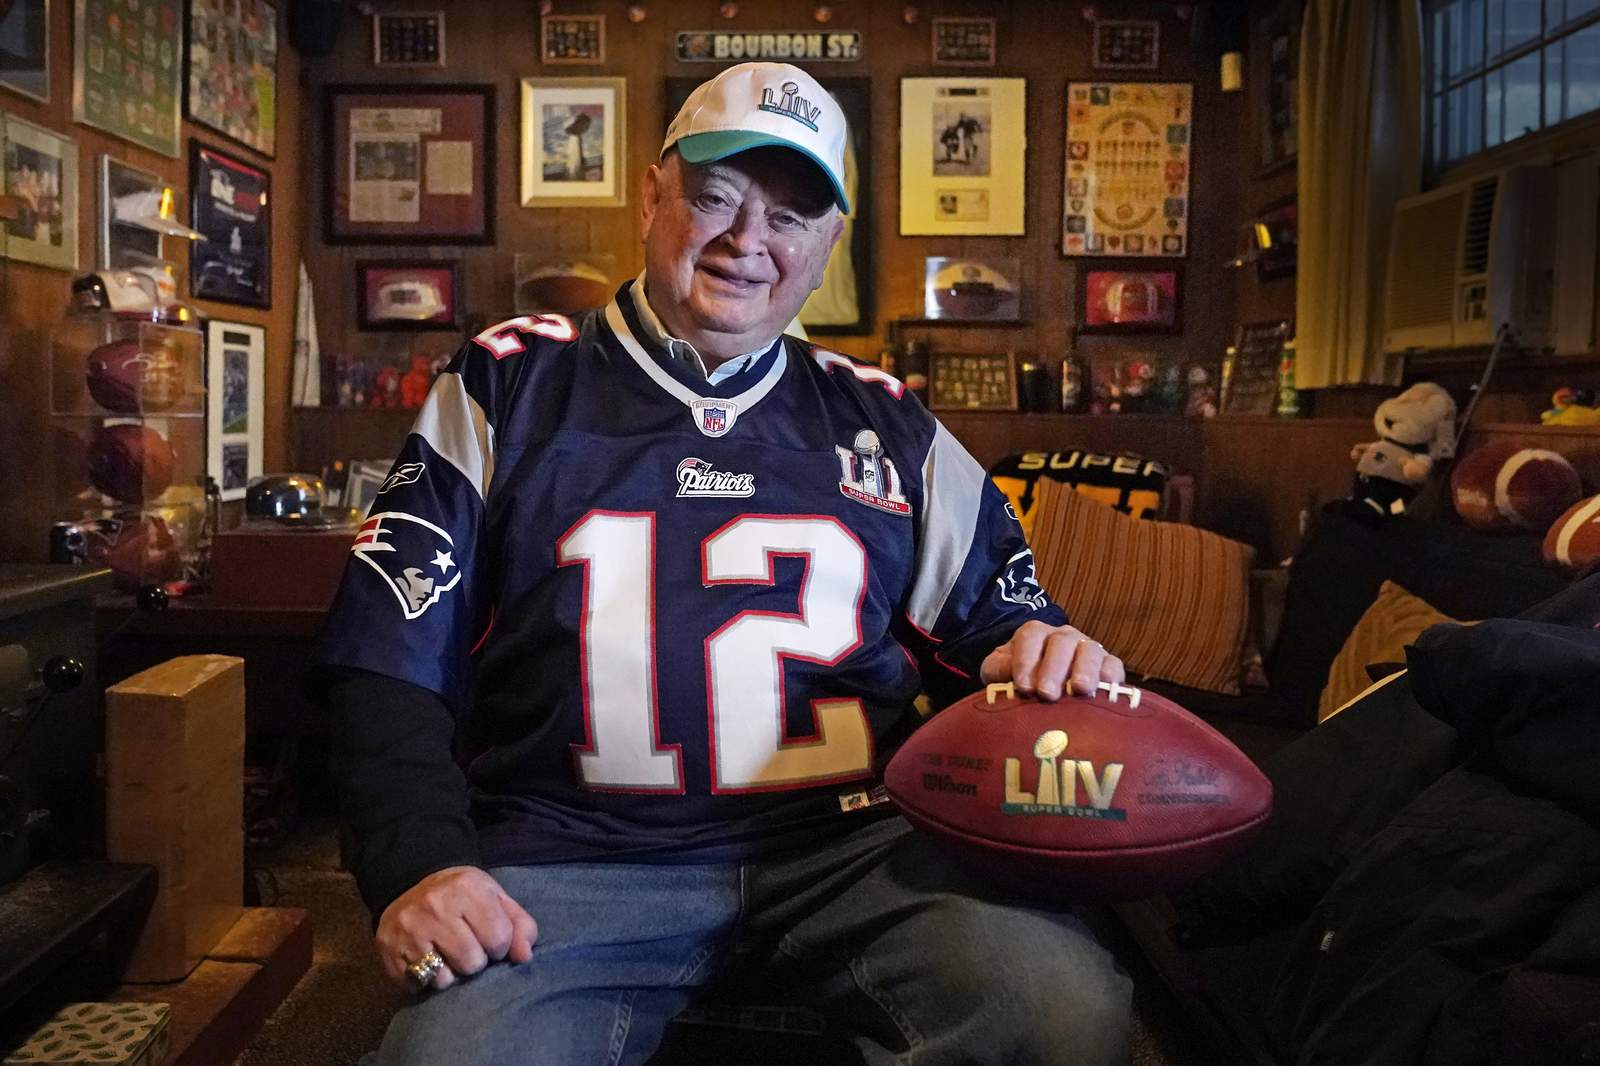 'I have to go': Fans who've been to every Super Bowl book in